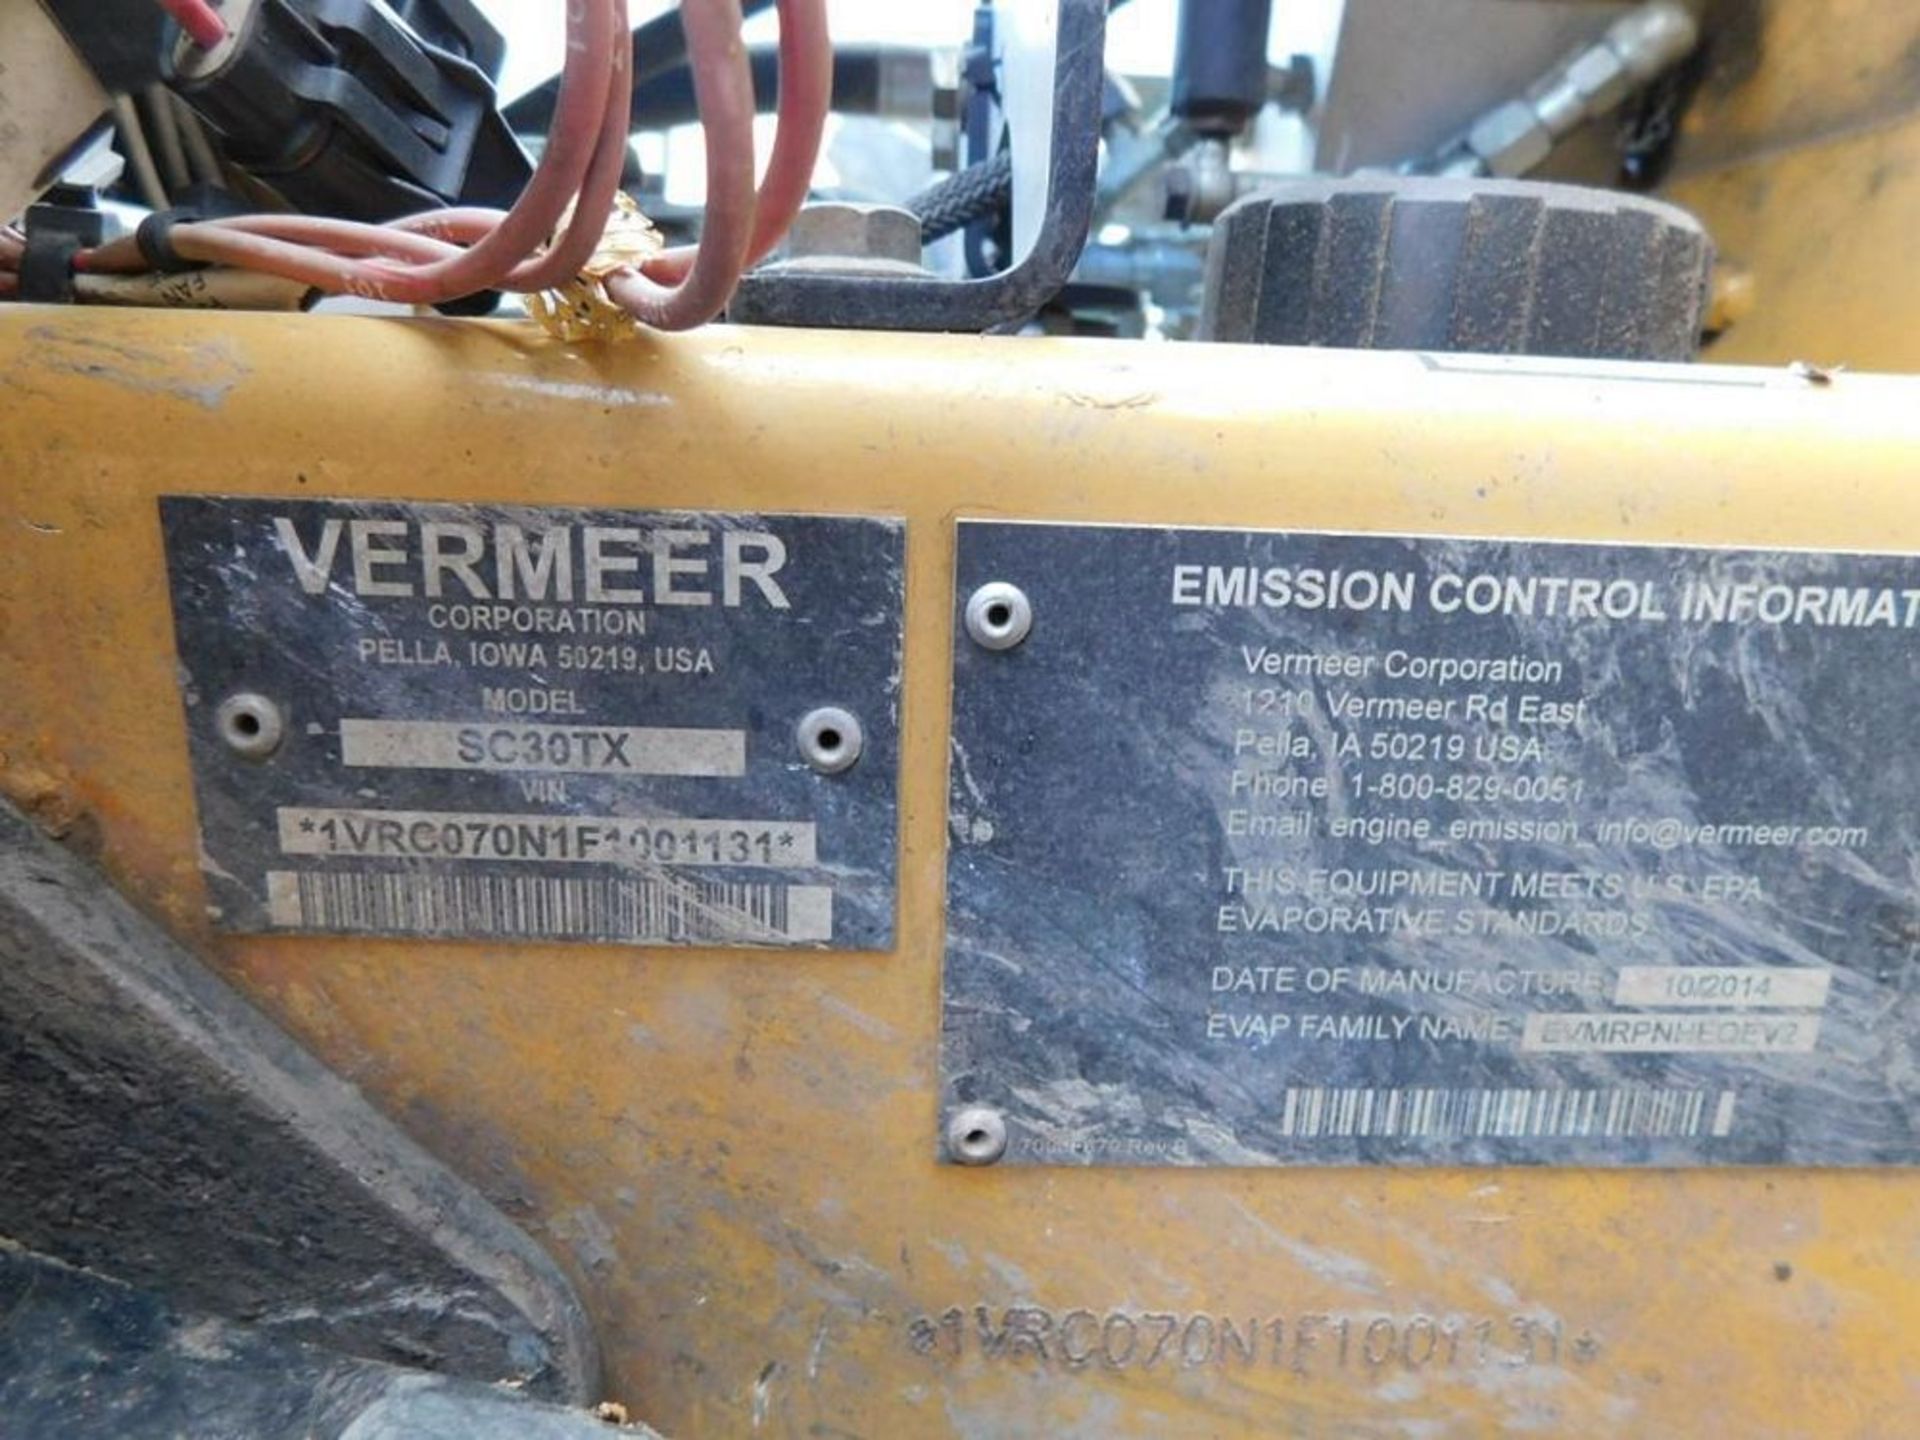 2016 Vermeer SC30 TX Gas Stump Cutter, VIN 1VRC070N1F1001131, 803 Indicated Hours (#1) (LOCATION: - Image 21 of 23